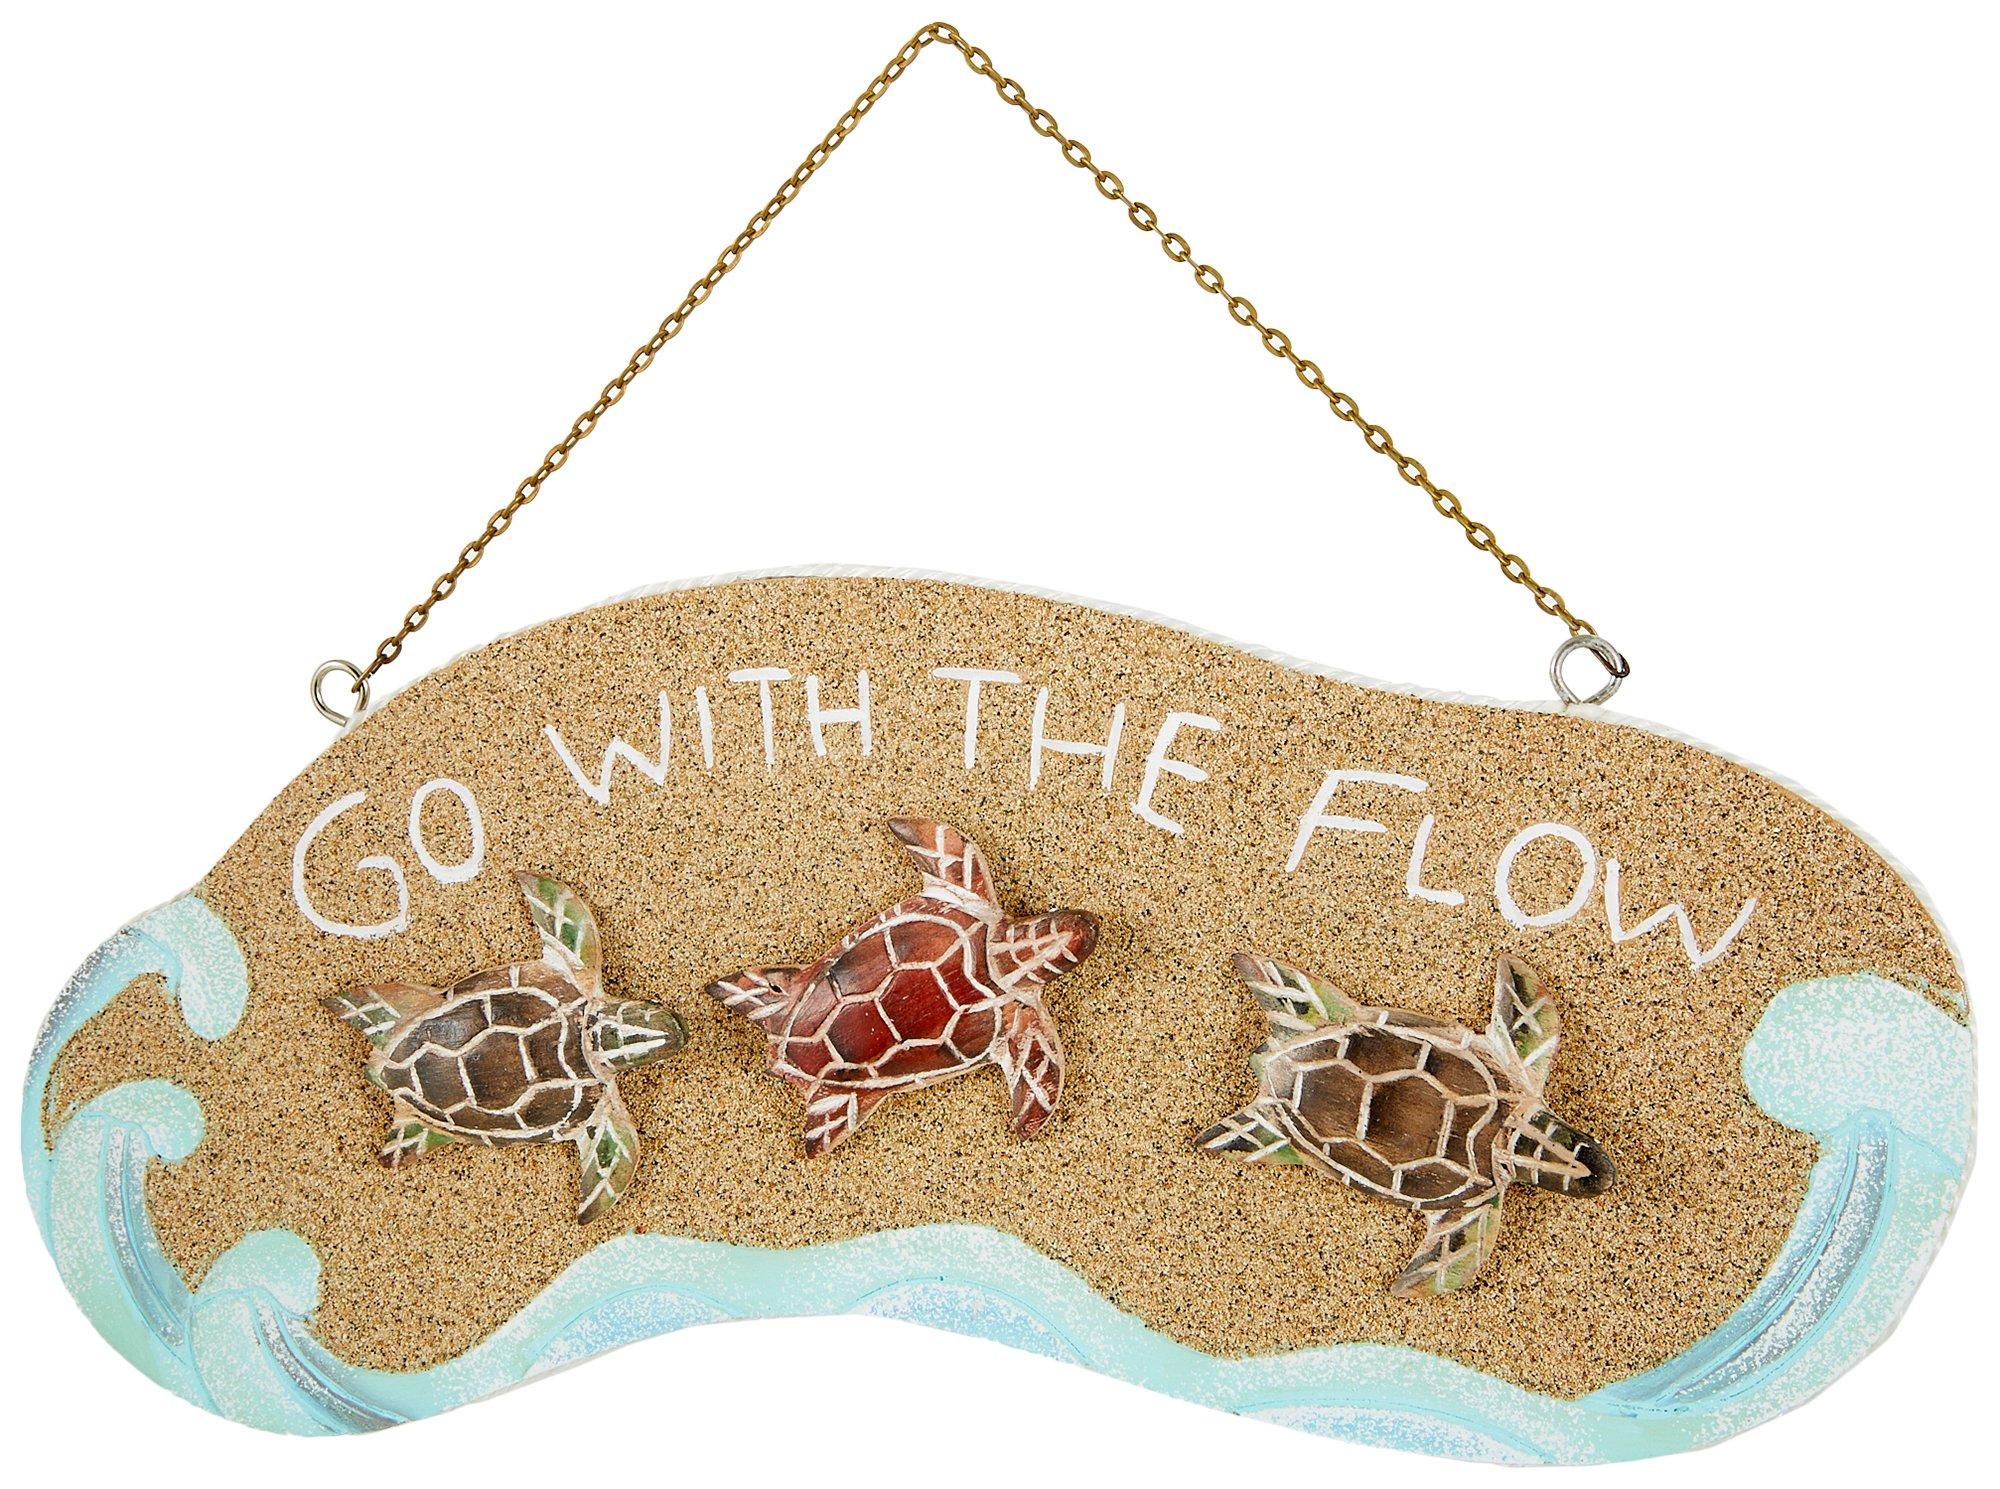 Go With The Flow Sea Turtles Wall Decor